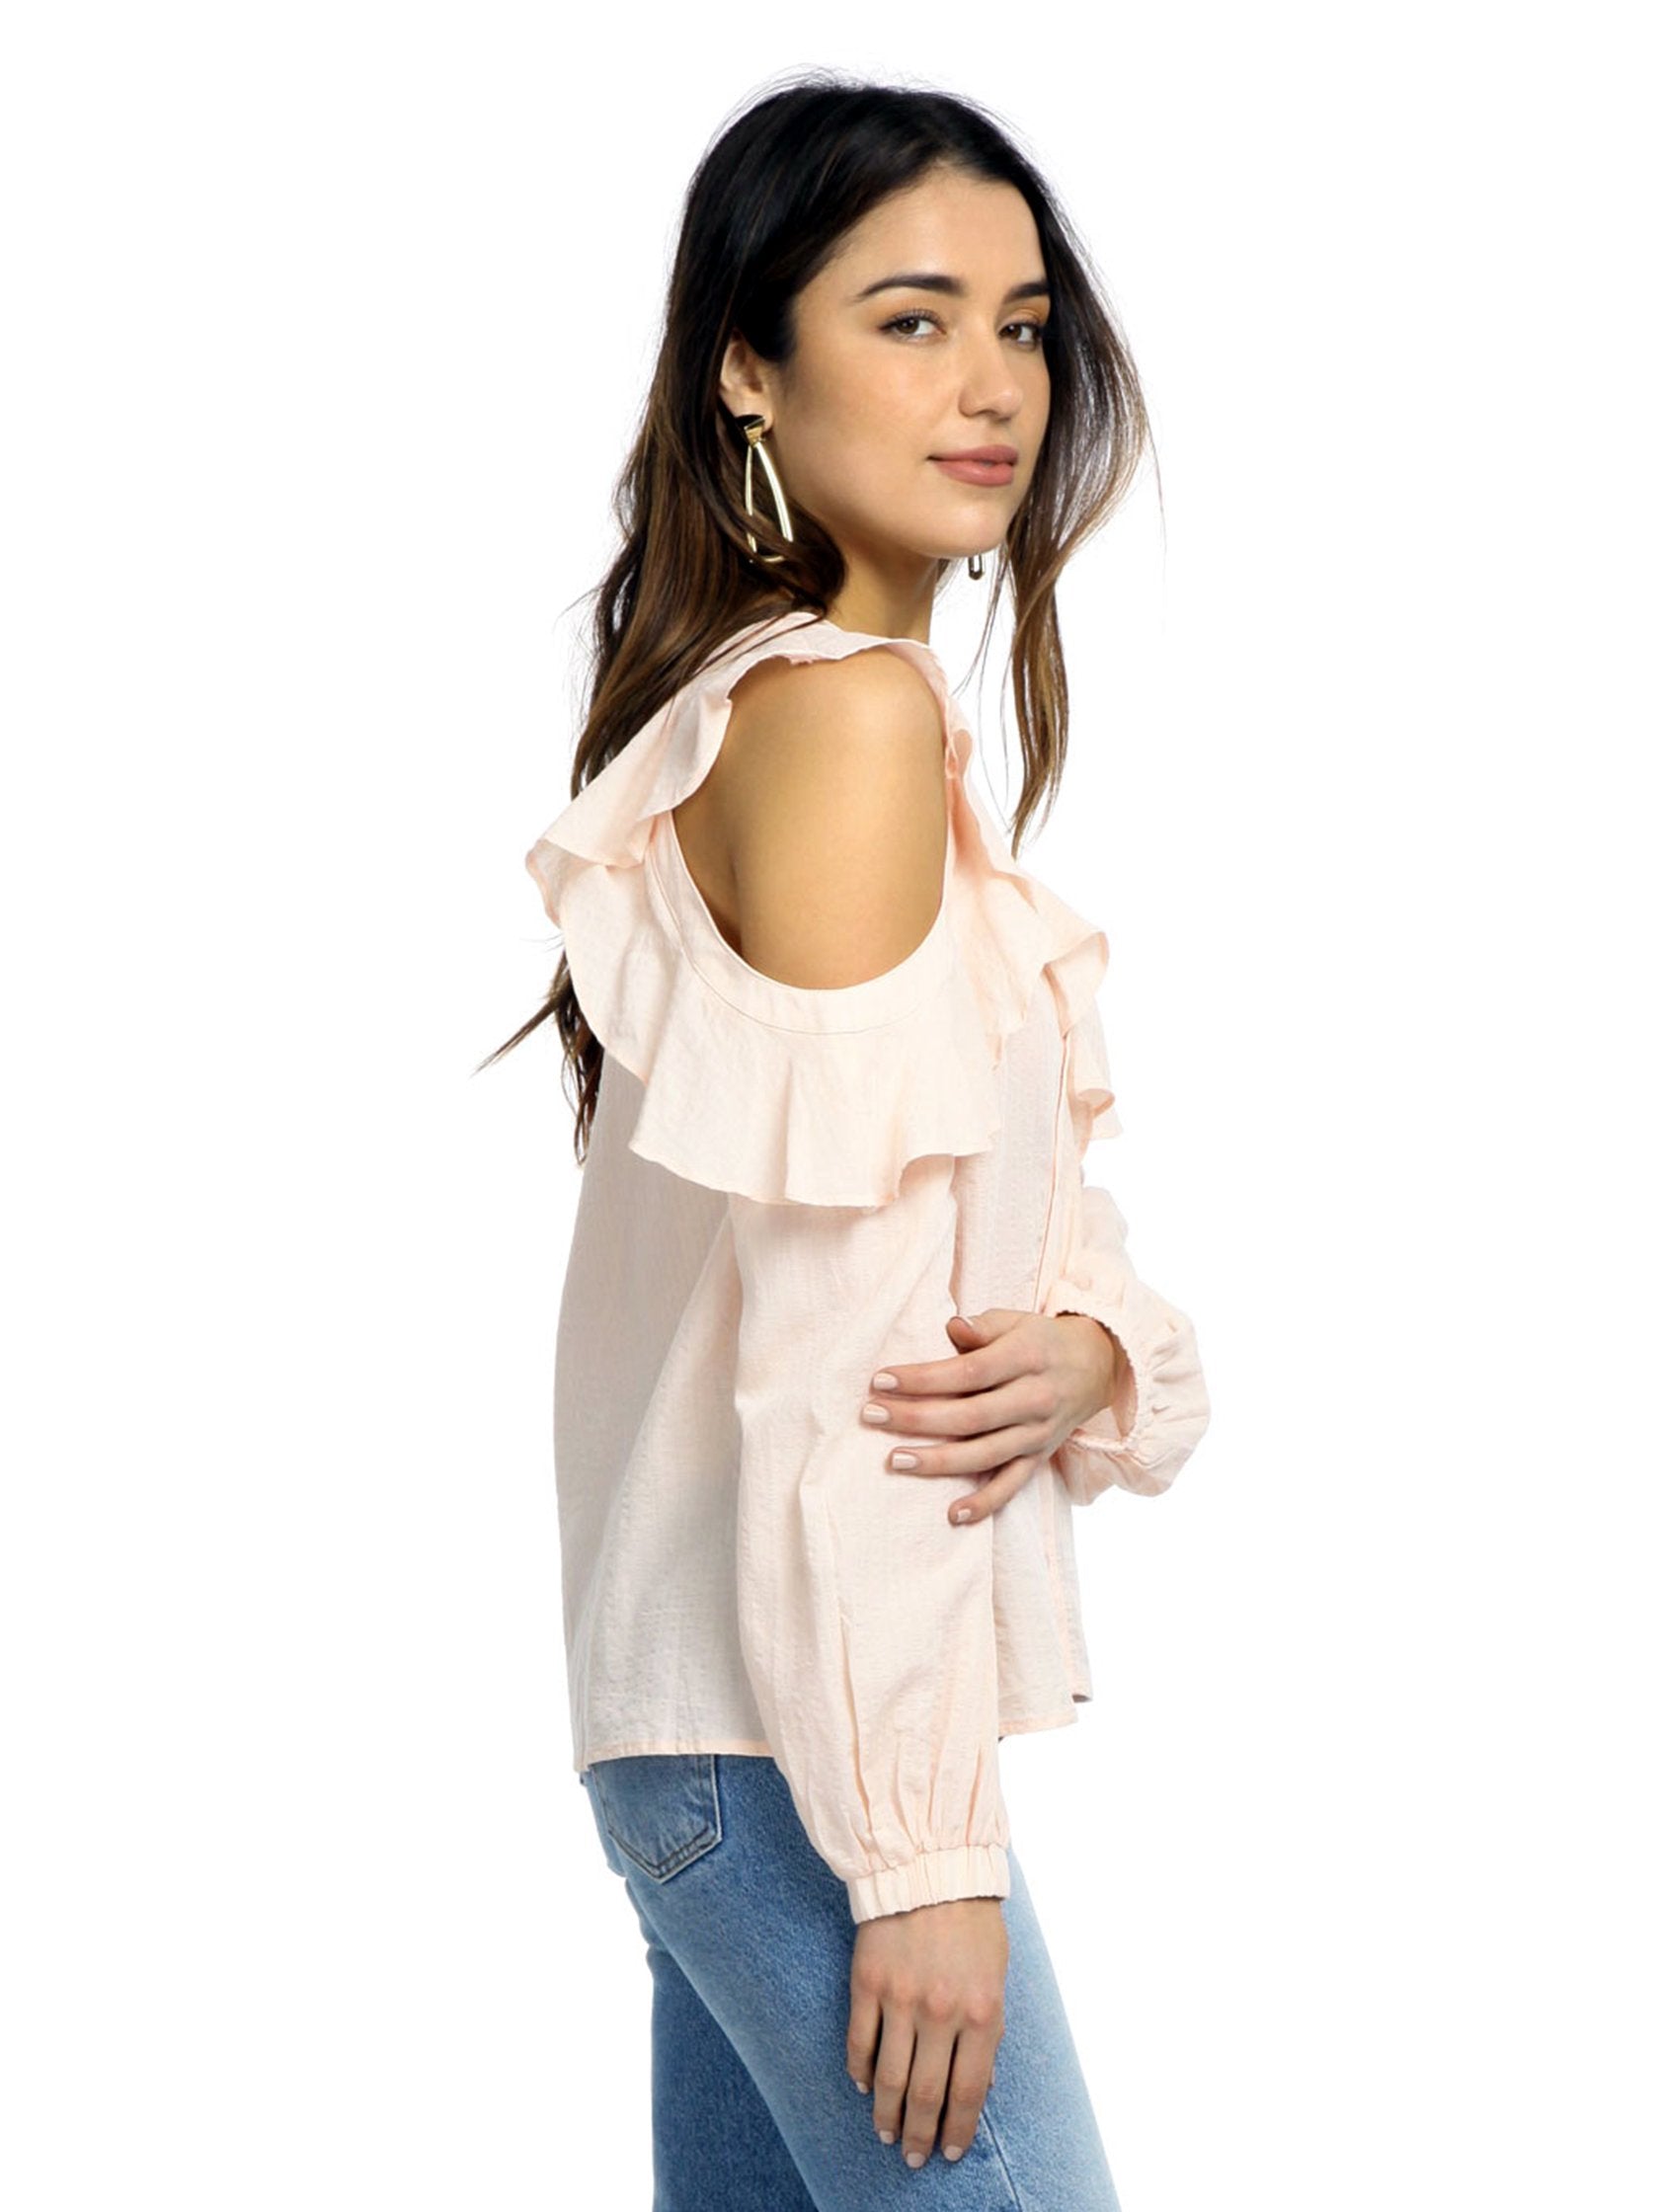 Women outfit in a top rental from ASTR called Paige Off The Shoulder Blouse